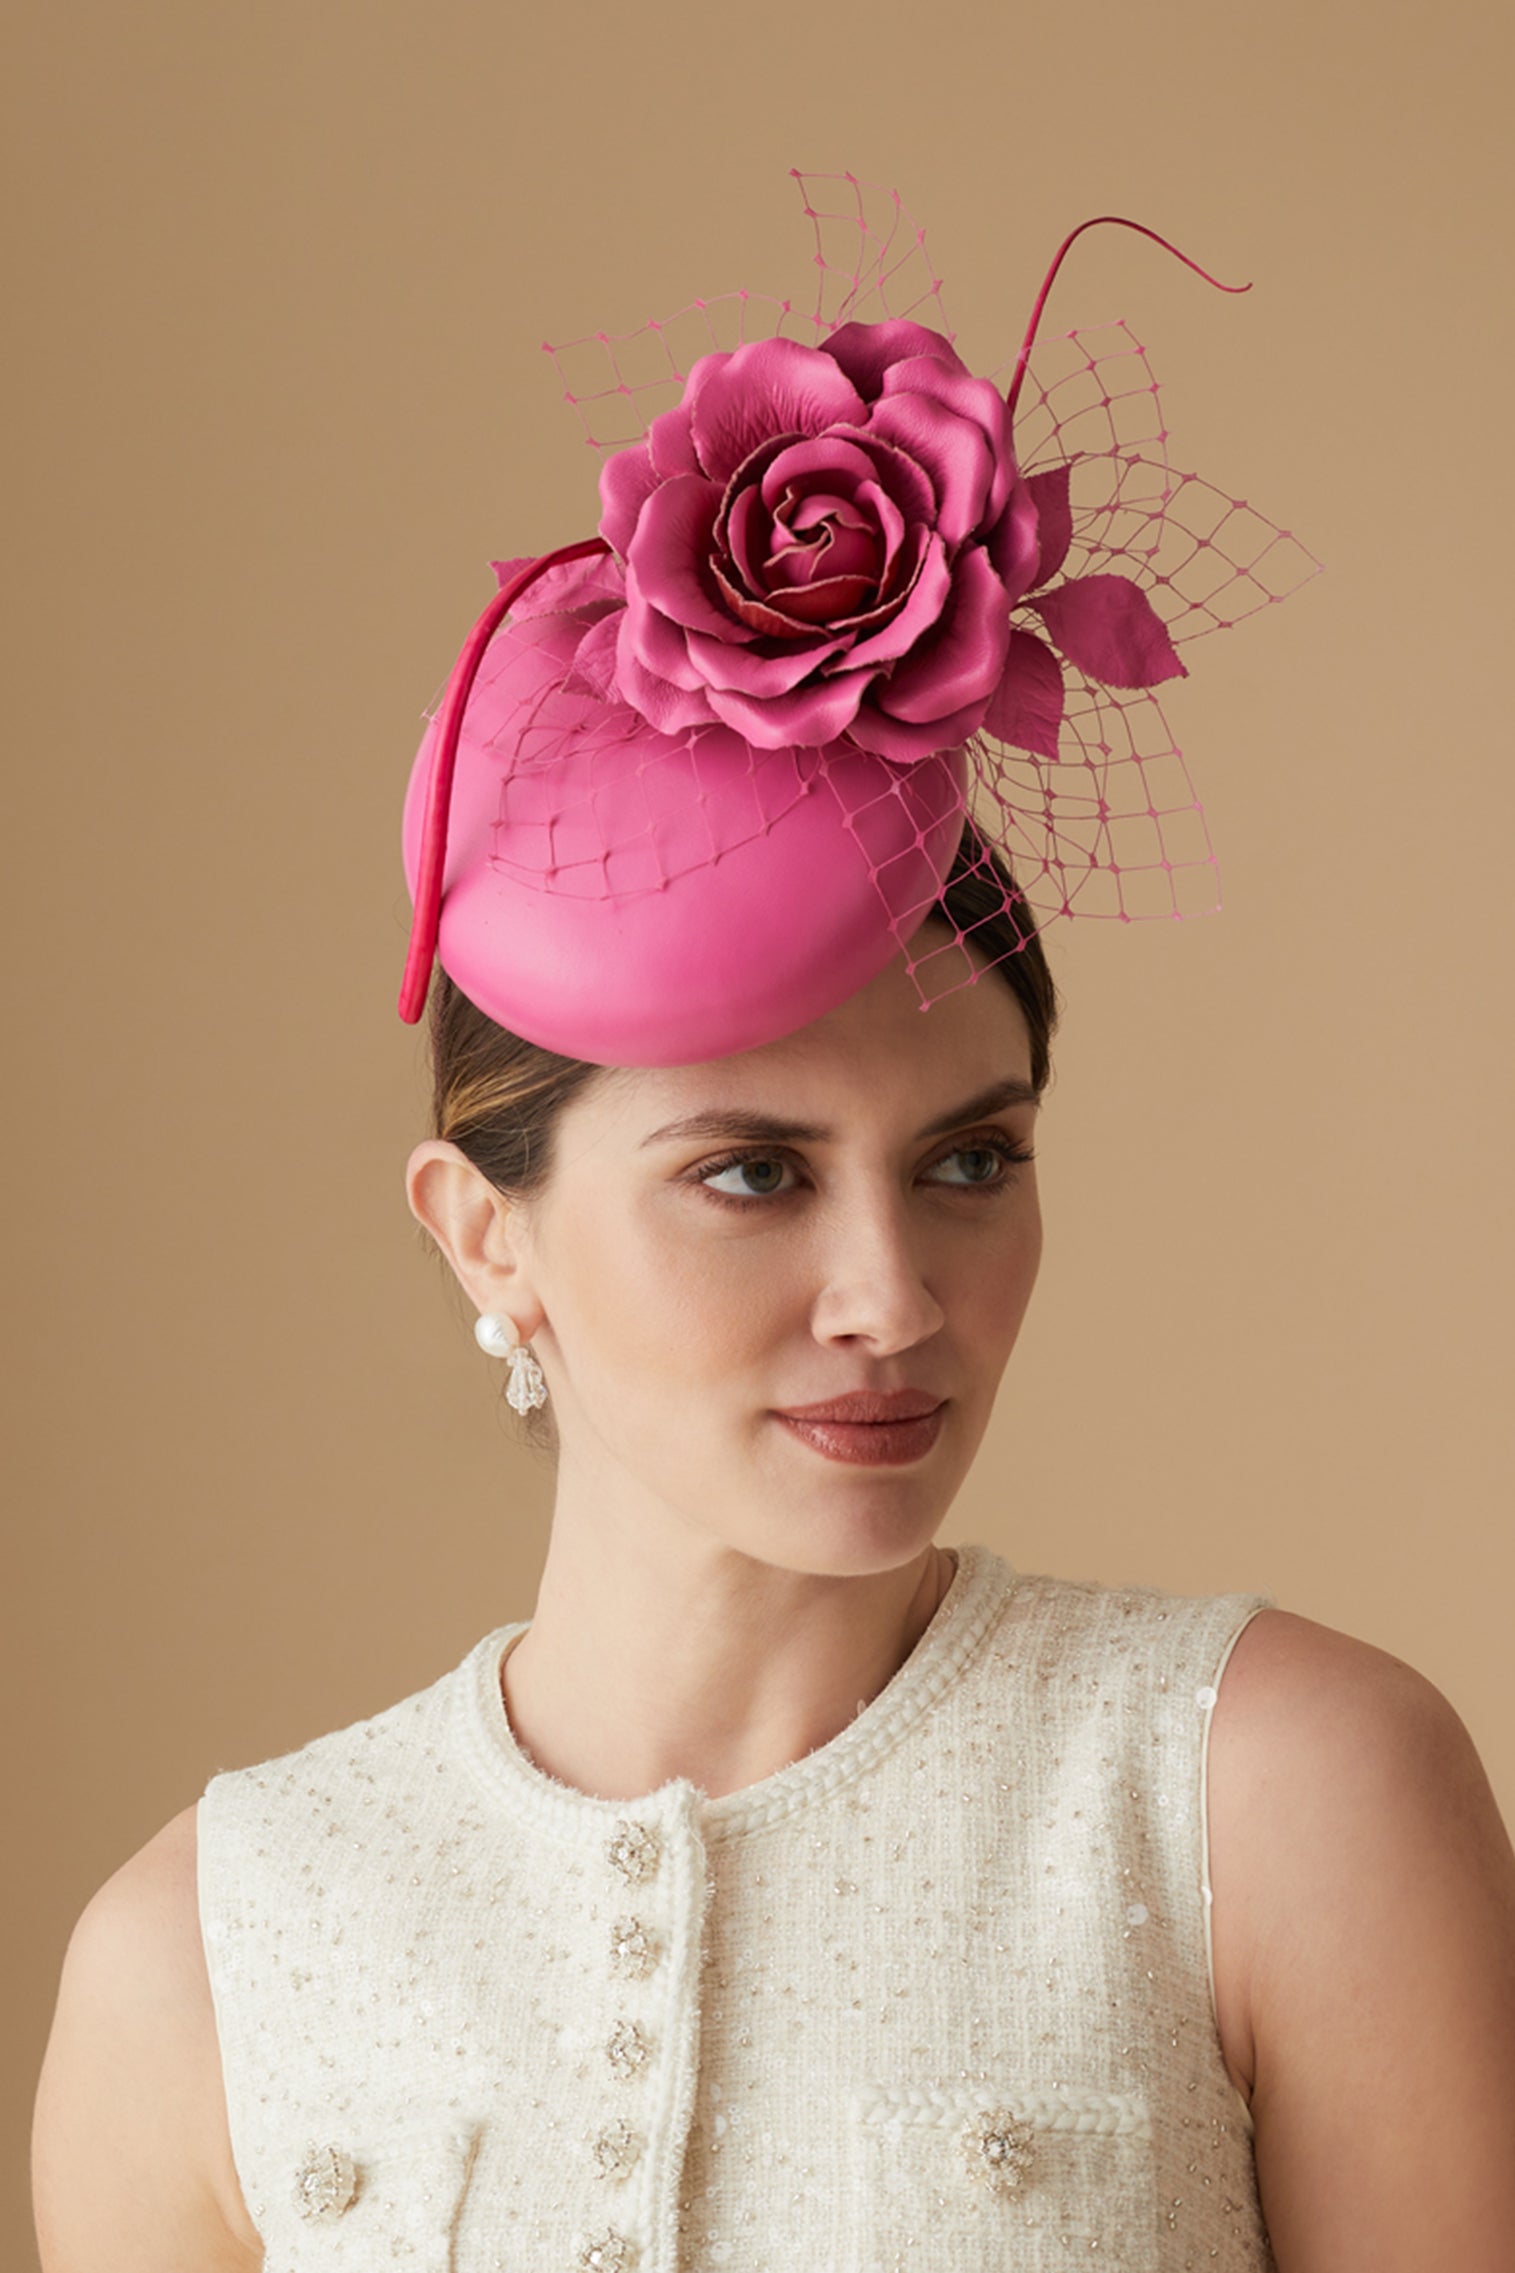 Rose Bud Pink Leather Percher Hat - New Season Hat Collection - Lock & Co. Hatters London UK